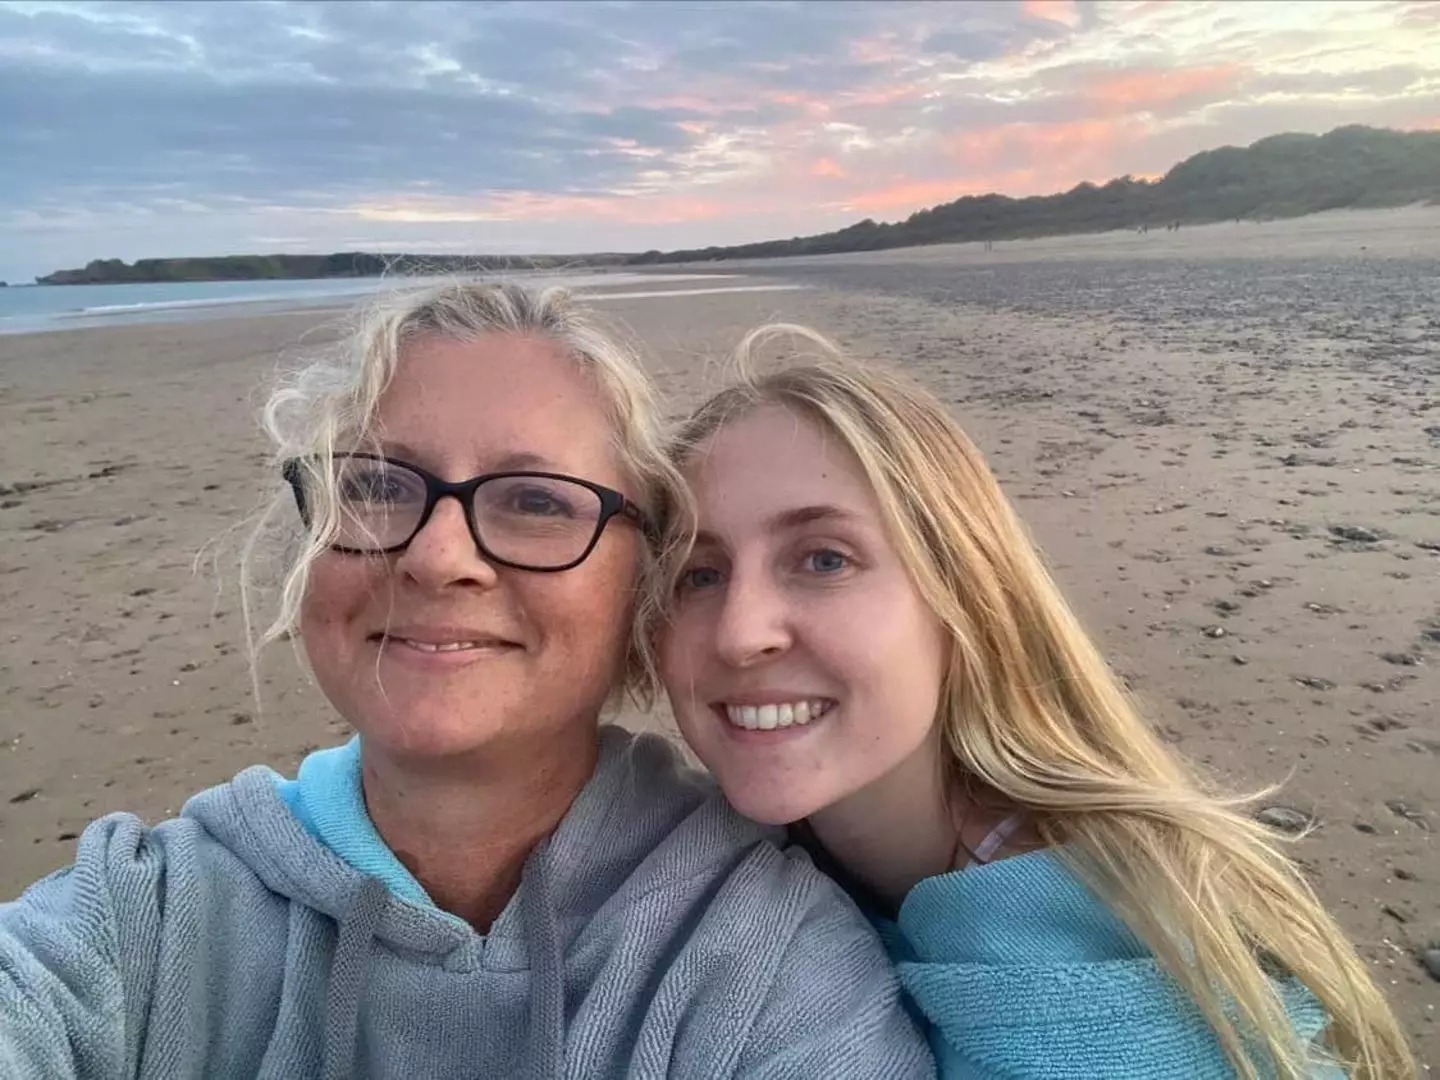 Caitlin Edwards and Jayne Etherington went swimming off a beach in Pembrokeshire.